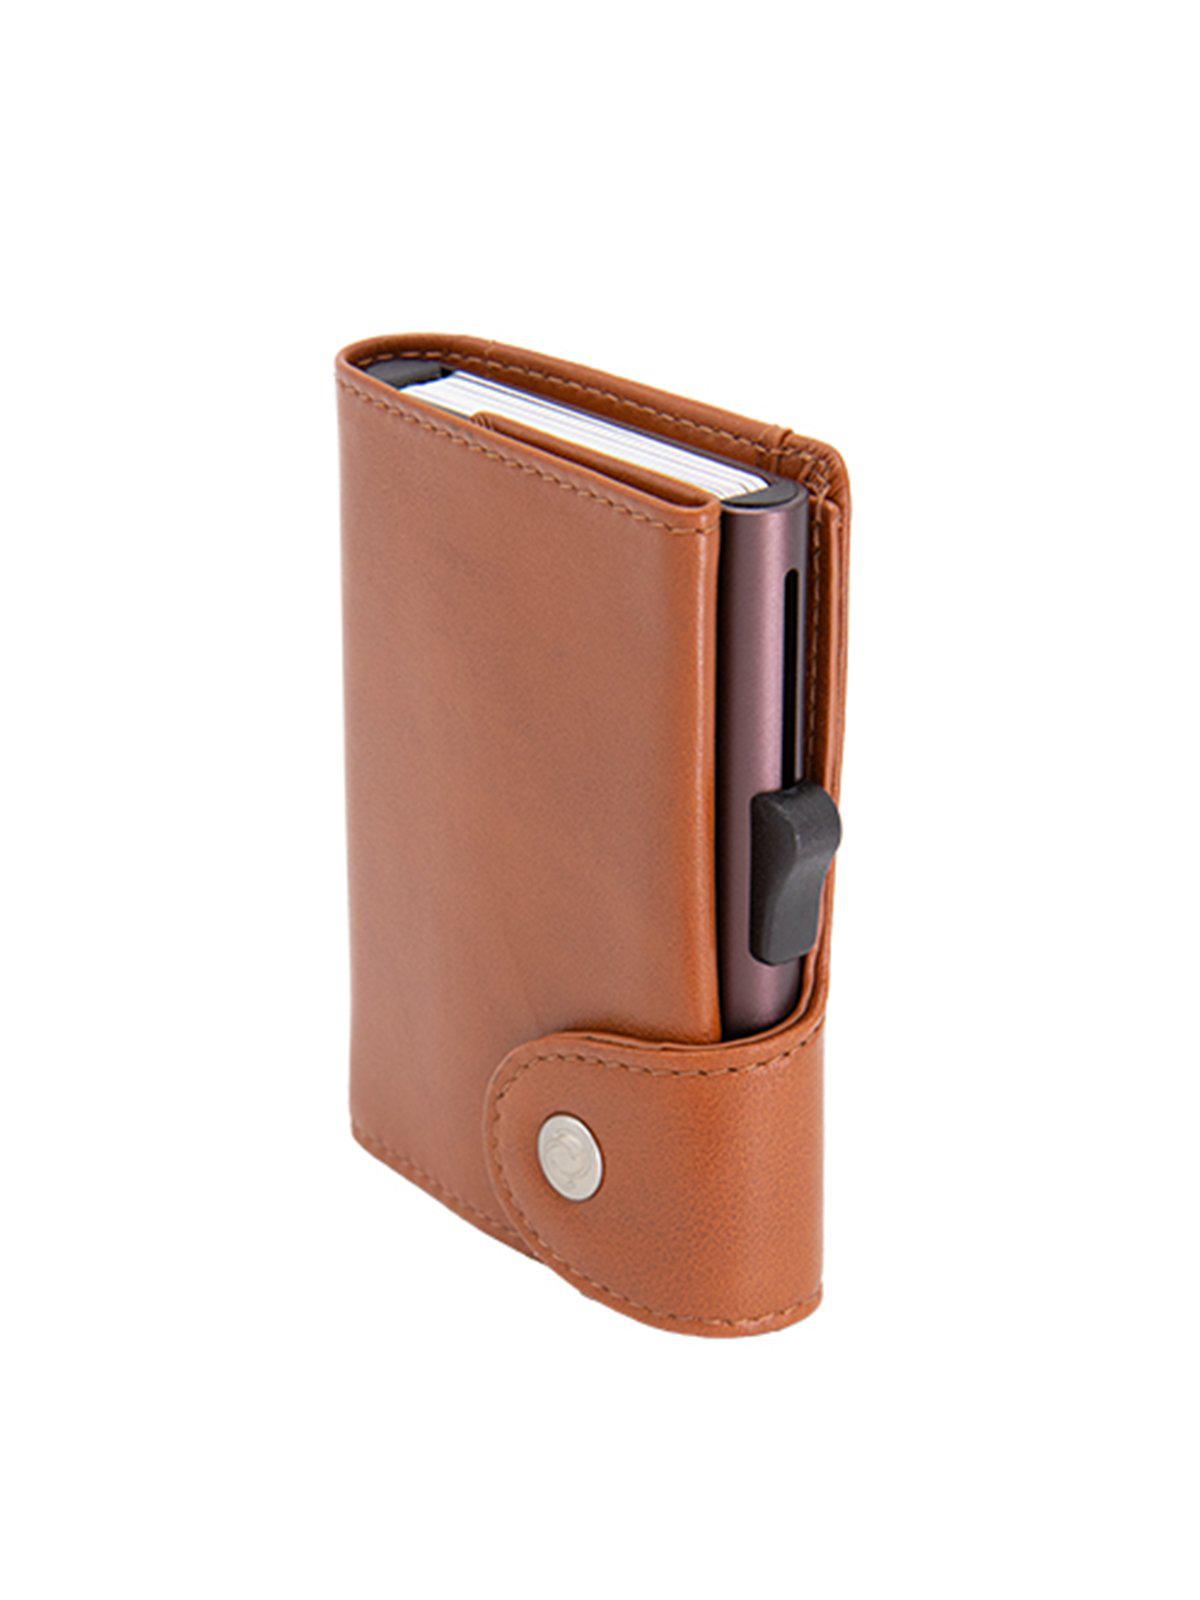 C-Secure XL Italian Leather Wallet RFID Chestnut Brown - MORE by Morello Indonesia